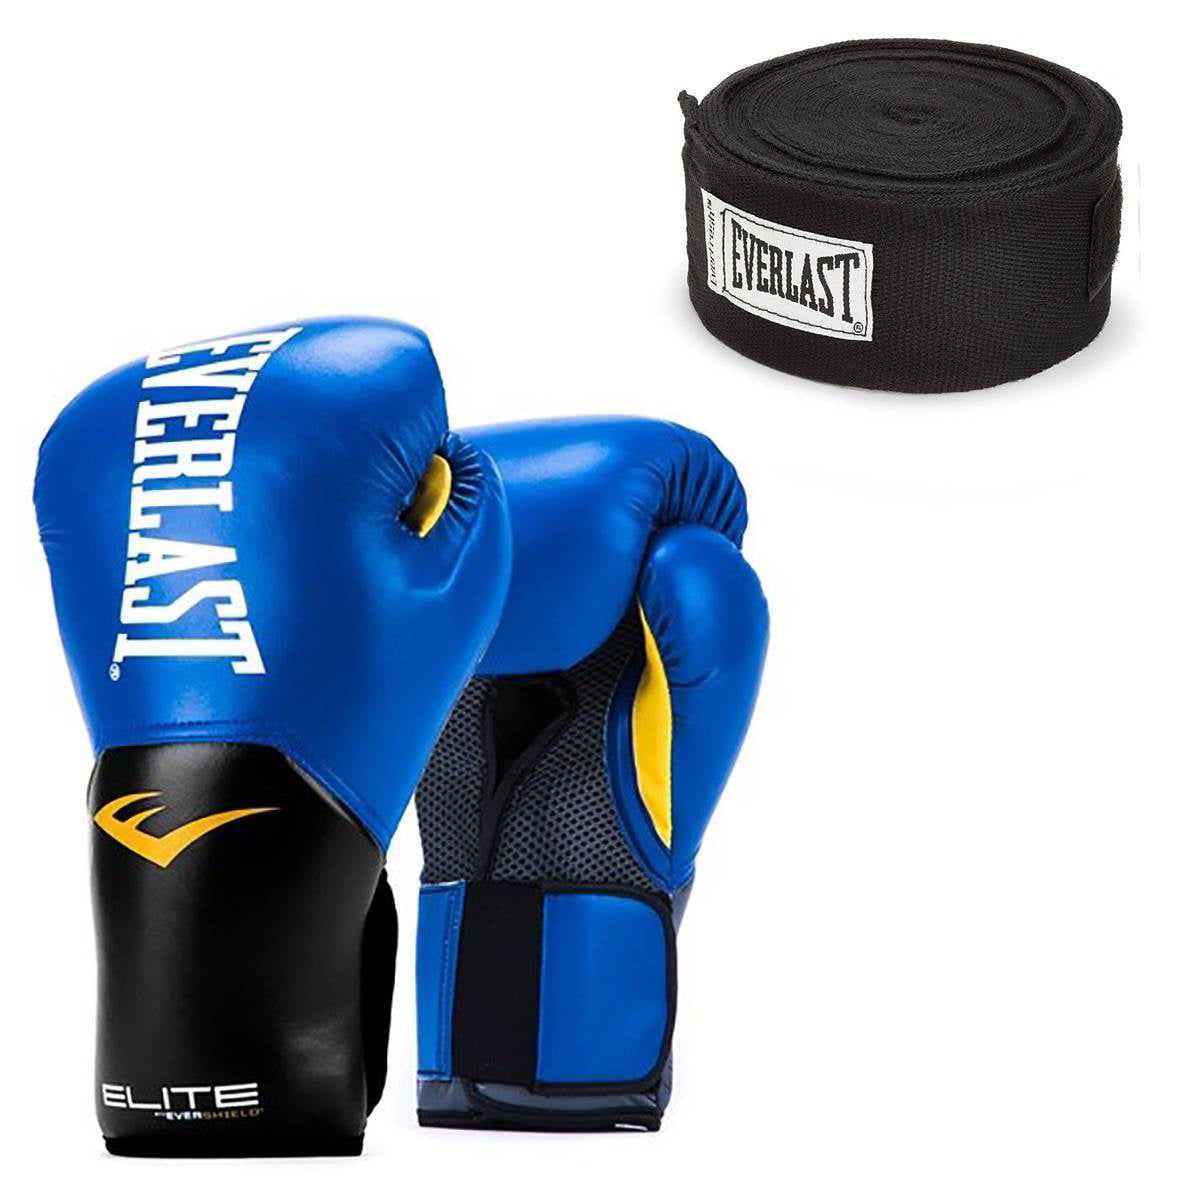 Everlast 4455-3 3-Pack Hand Wrap Professional Boxing Gym Workout Protective Gear 